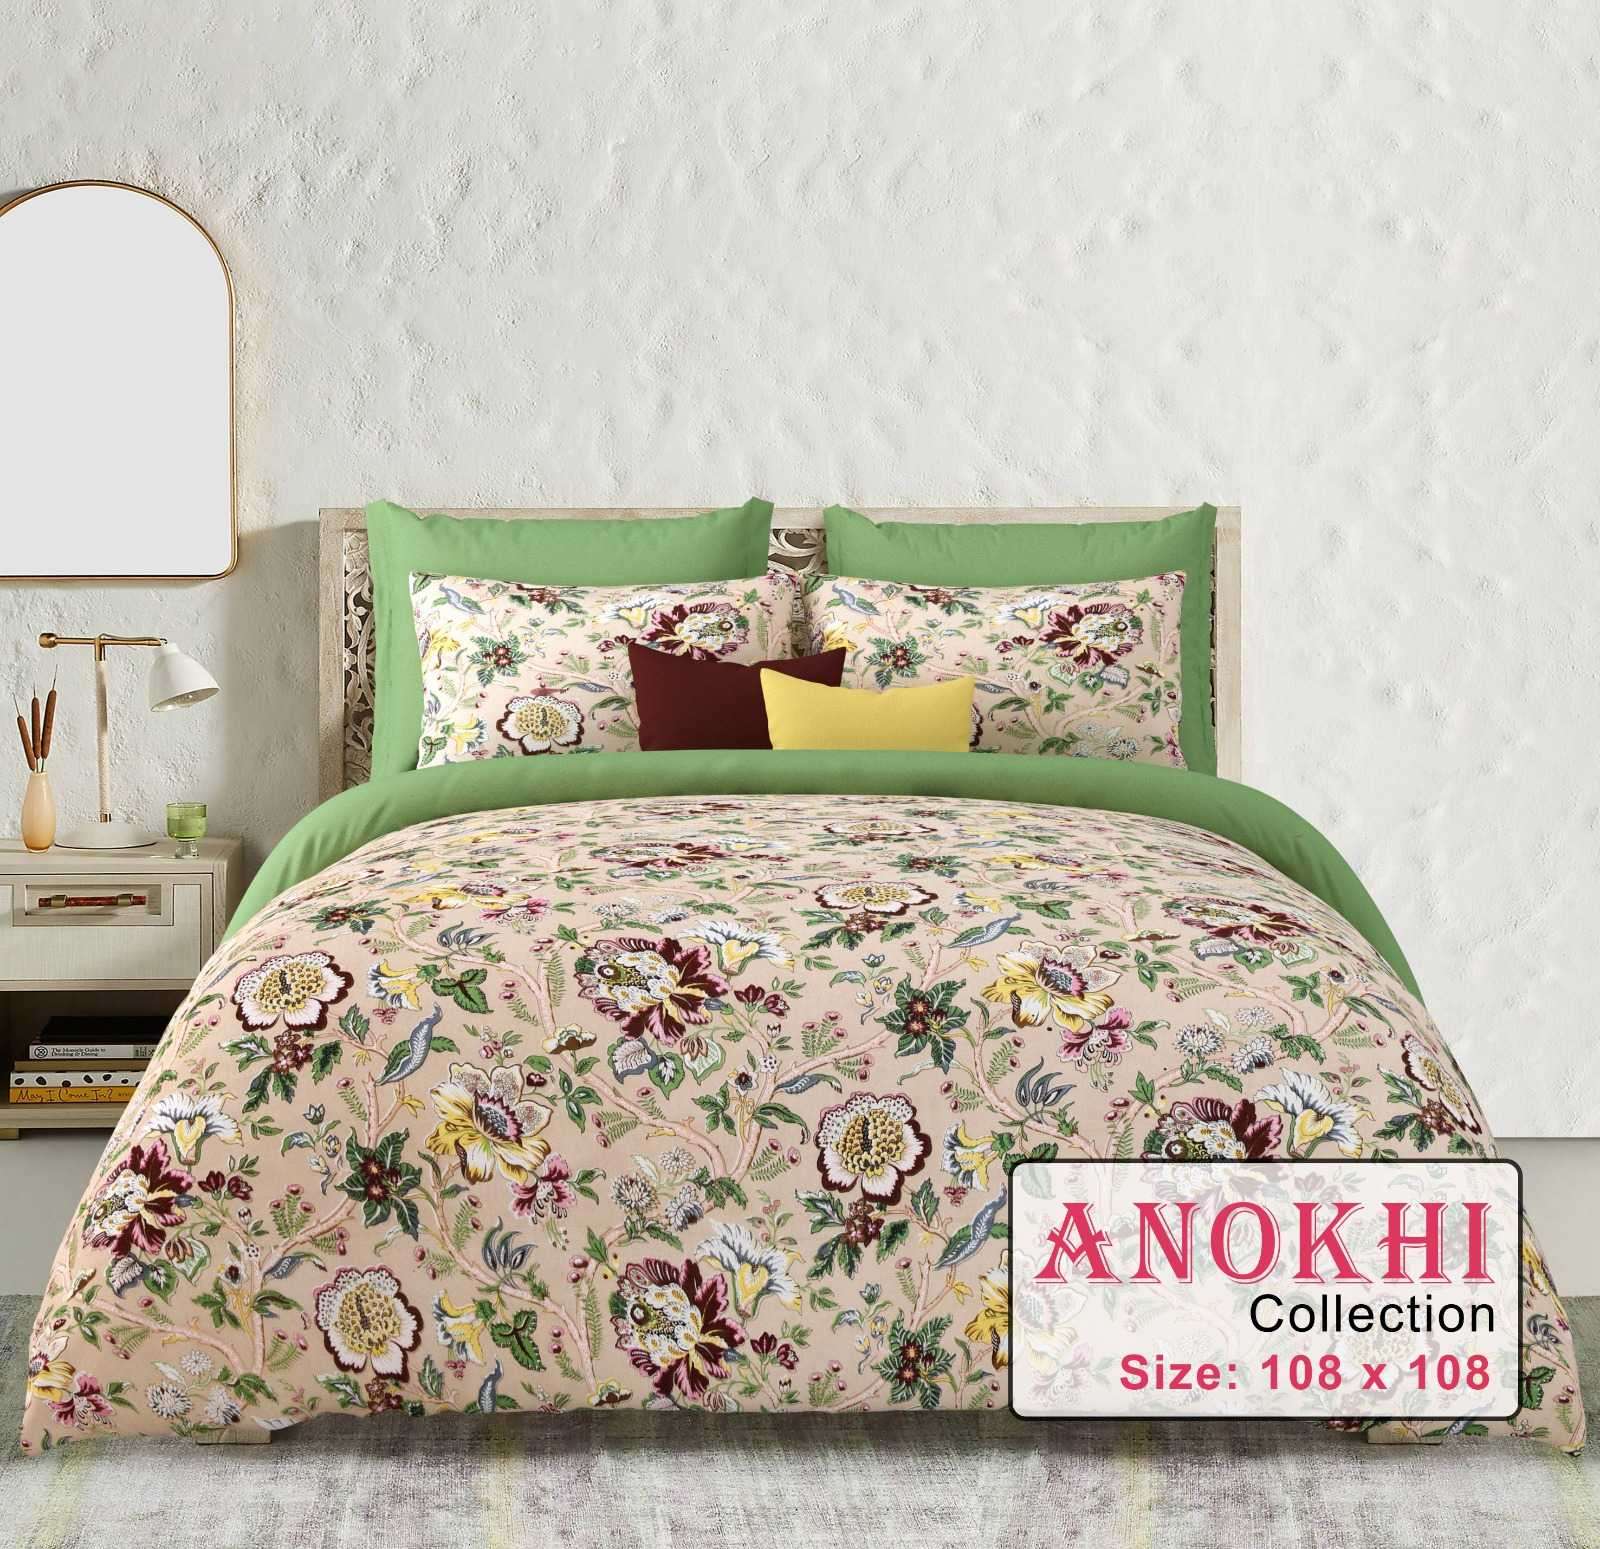 anokhi king size cotton fancy bedsheets with pillow cover exports